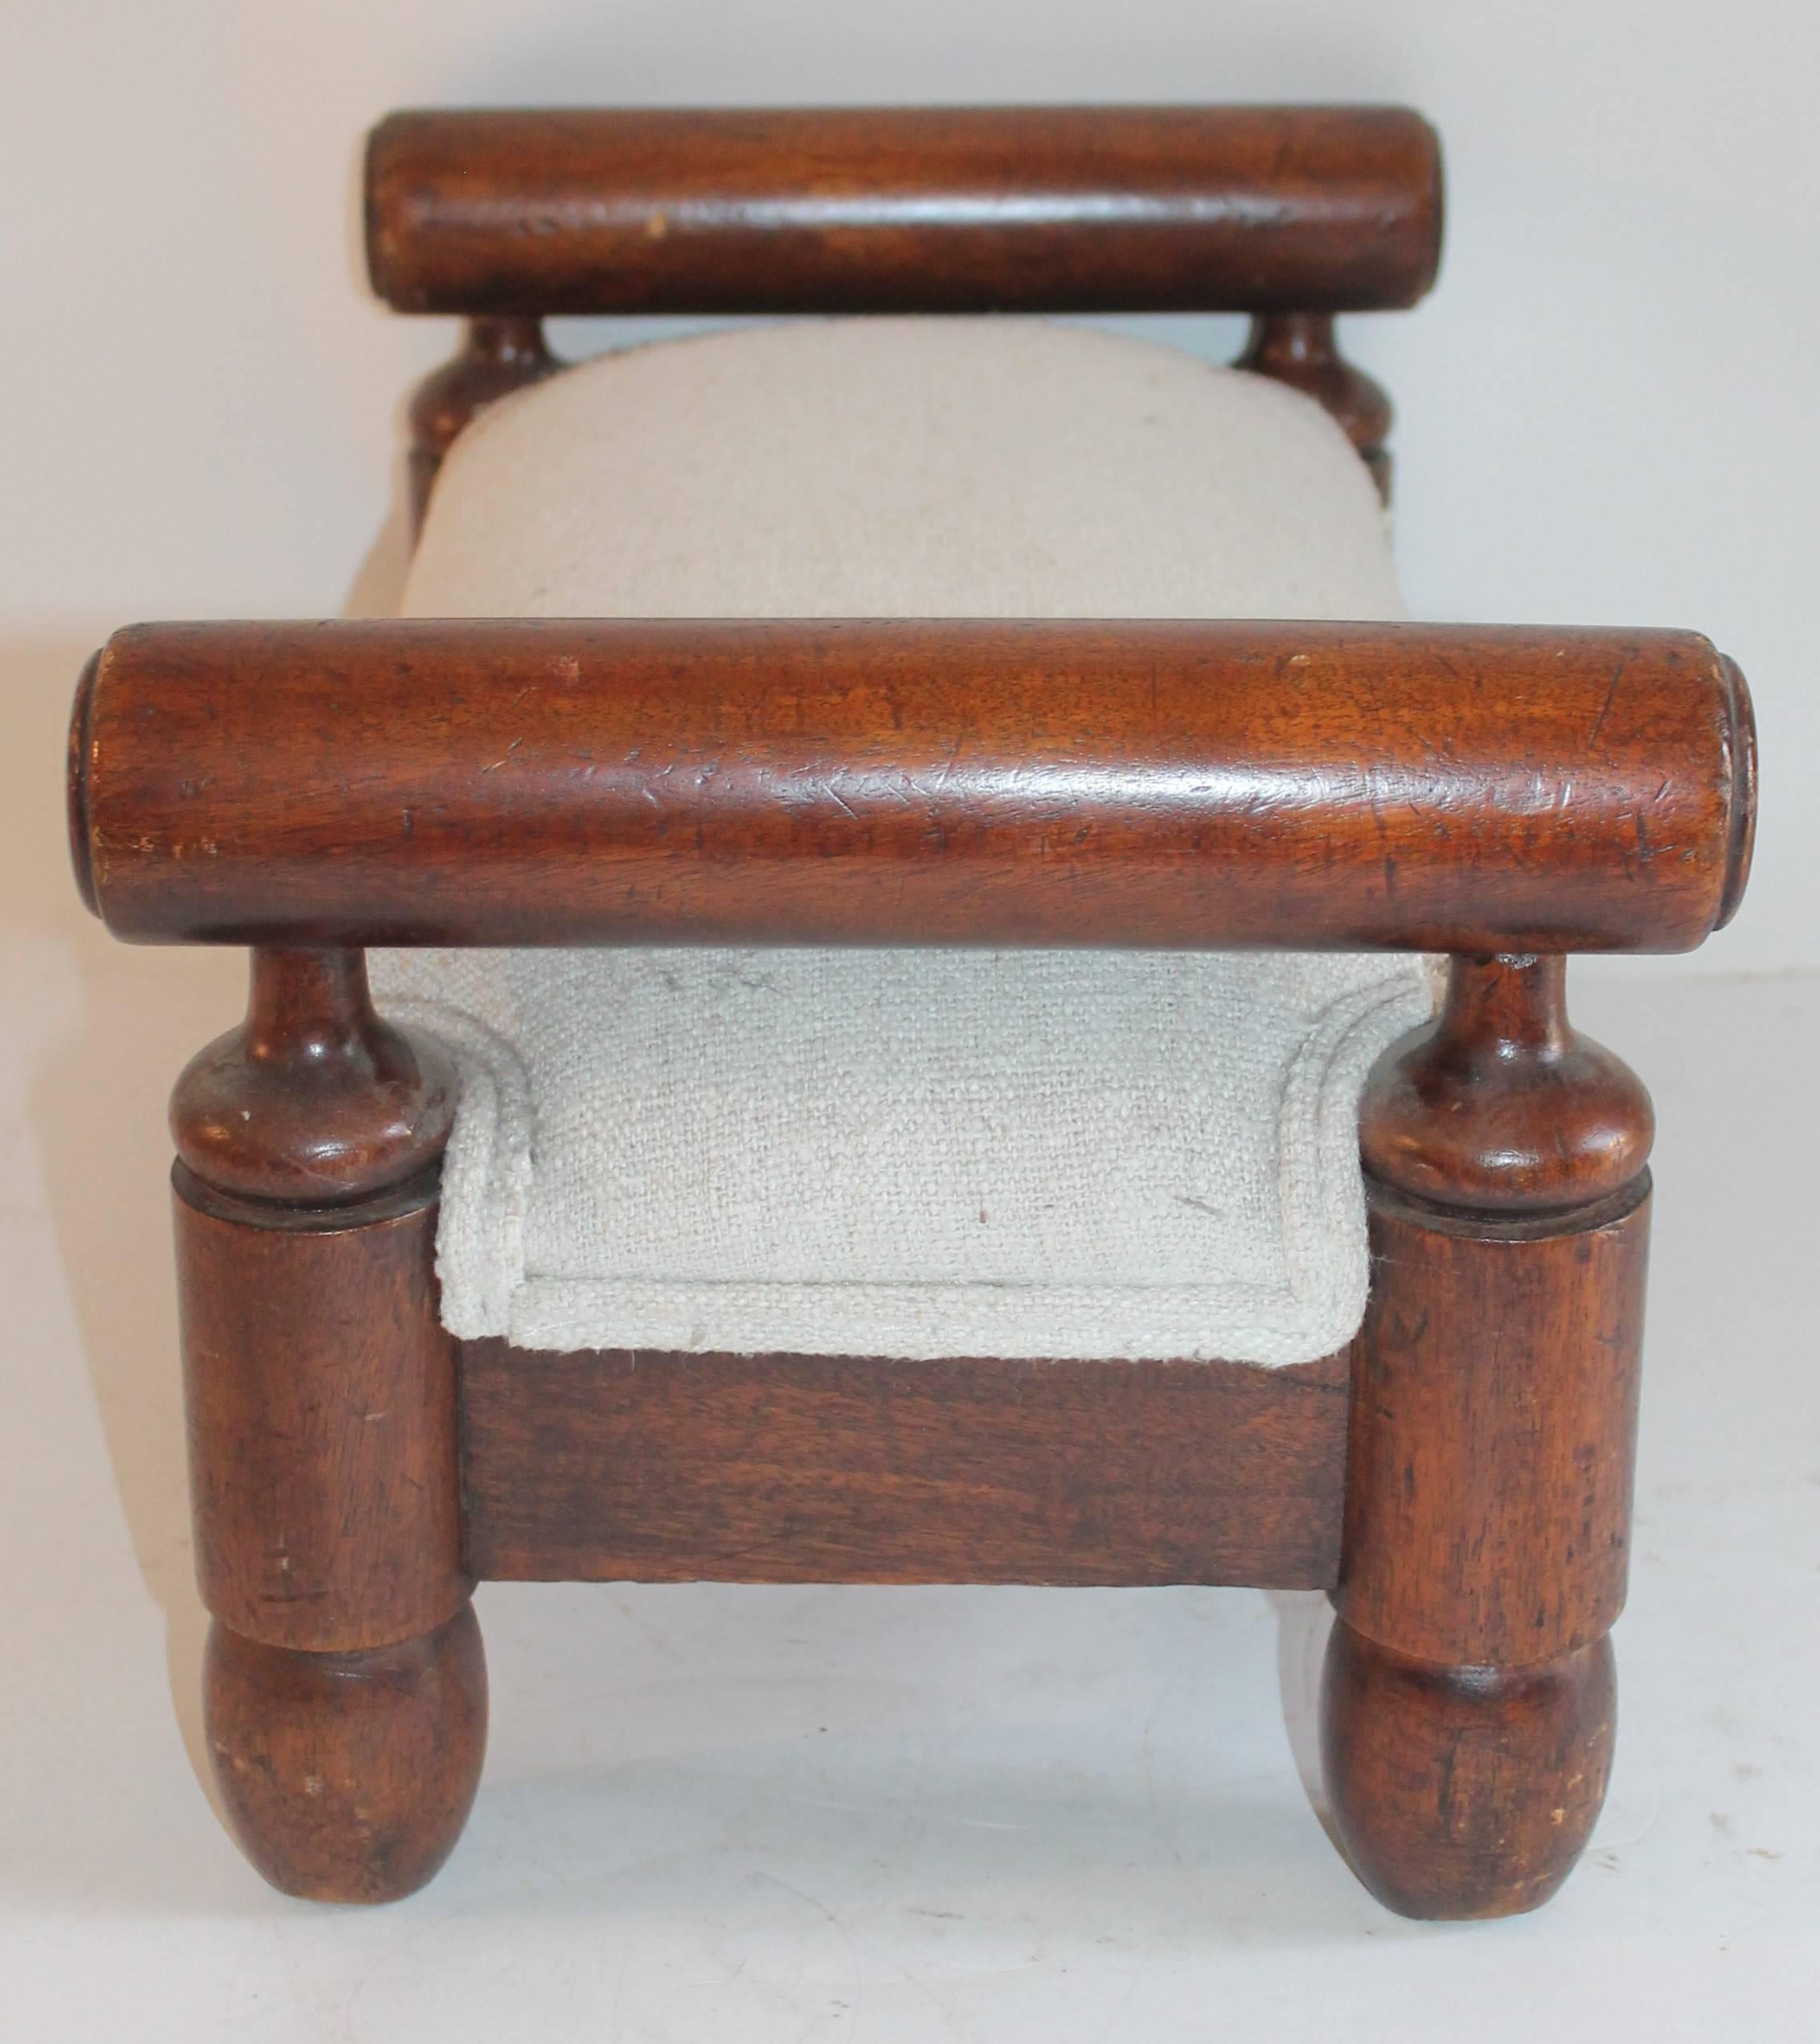 Hand-Crafted 19th Century Handmade Foot Stool with Homespun Upholstery